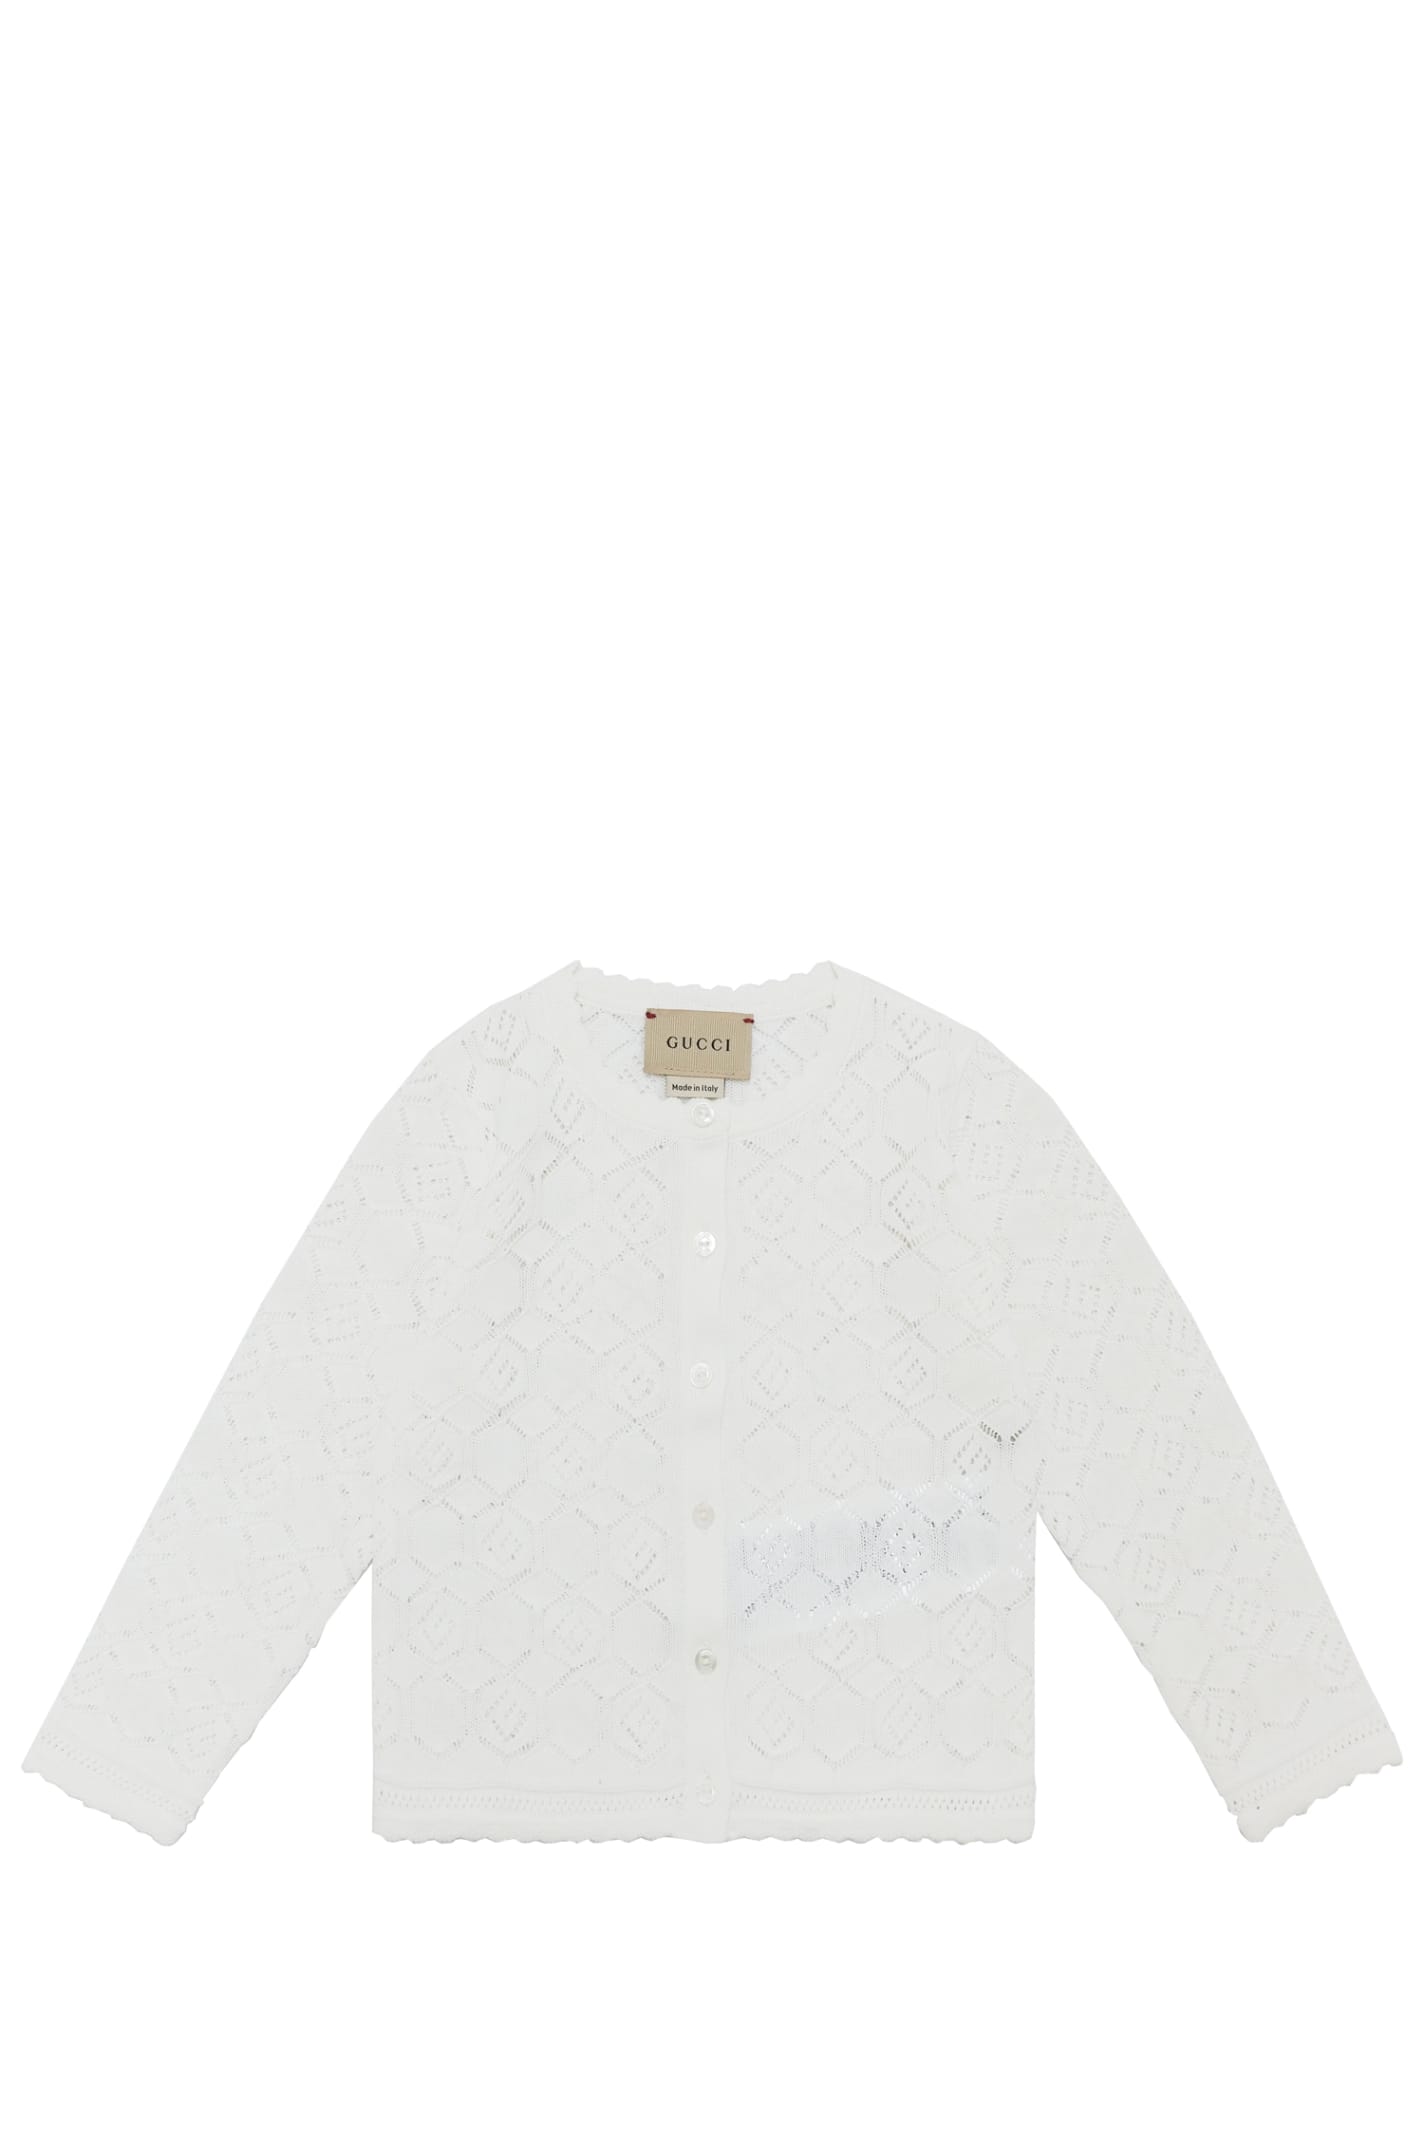 Gucci Kids' Embroidered Sweater In White